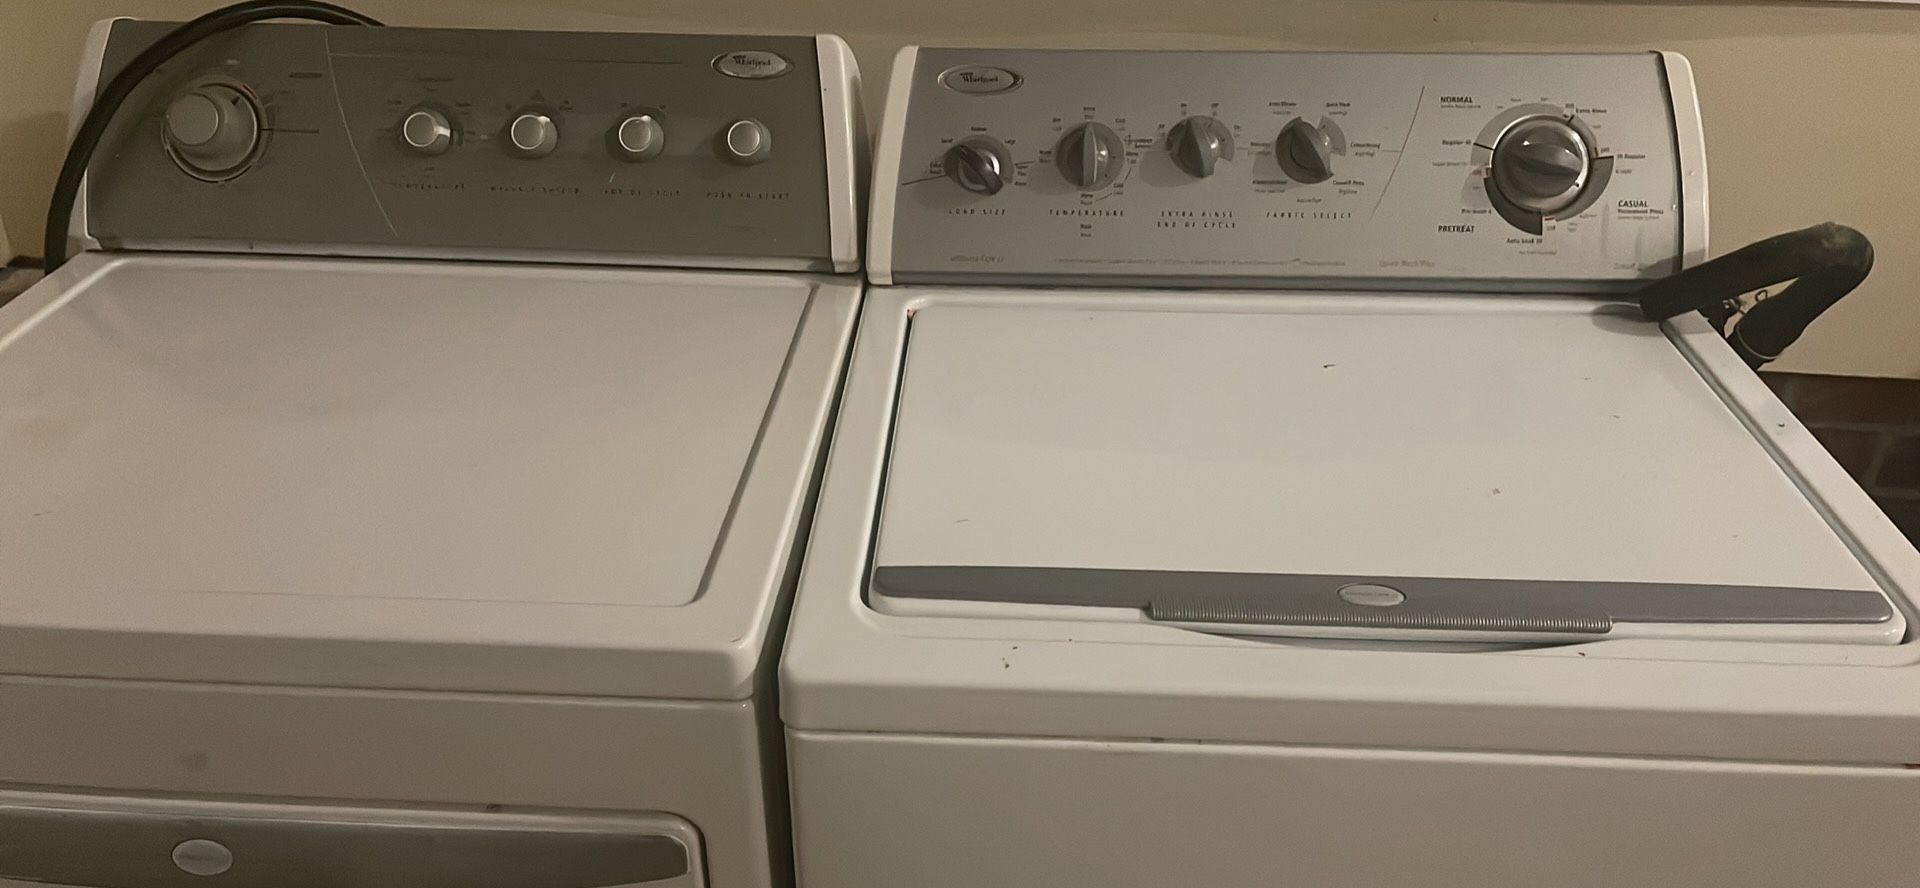 Whirlpool Gold Large Capacity Washer And Dryer Set  Dryer Takes A Little Longer To Dry Clothes Other Than That I Never Had Any Issues  